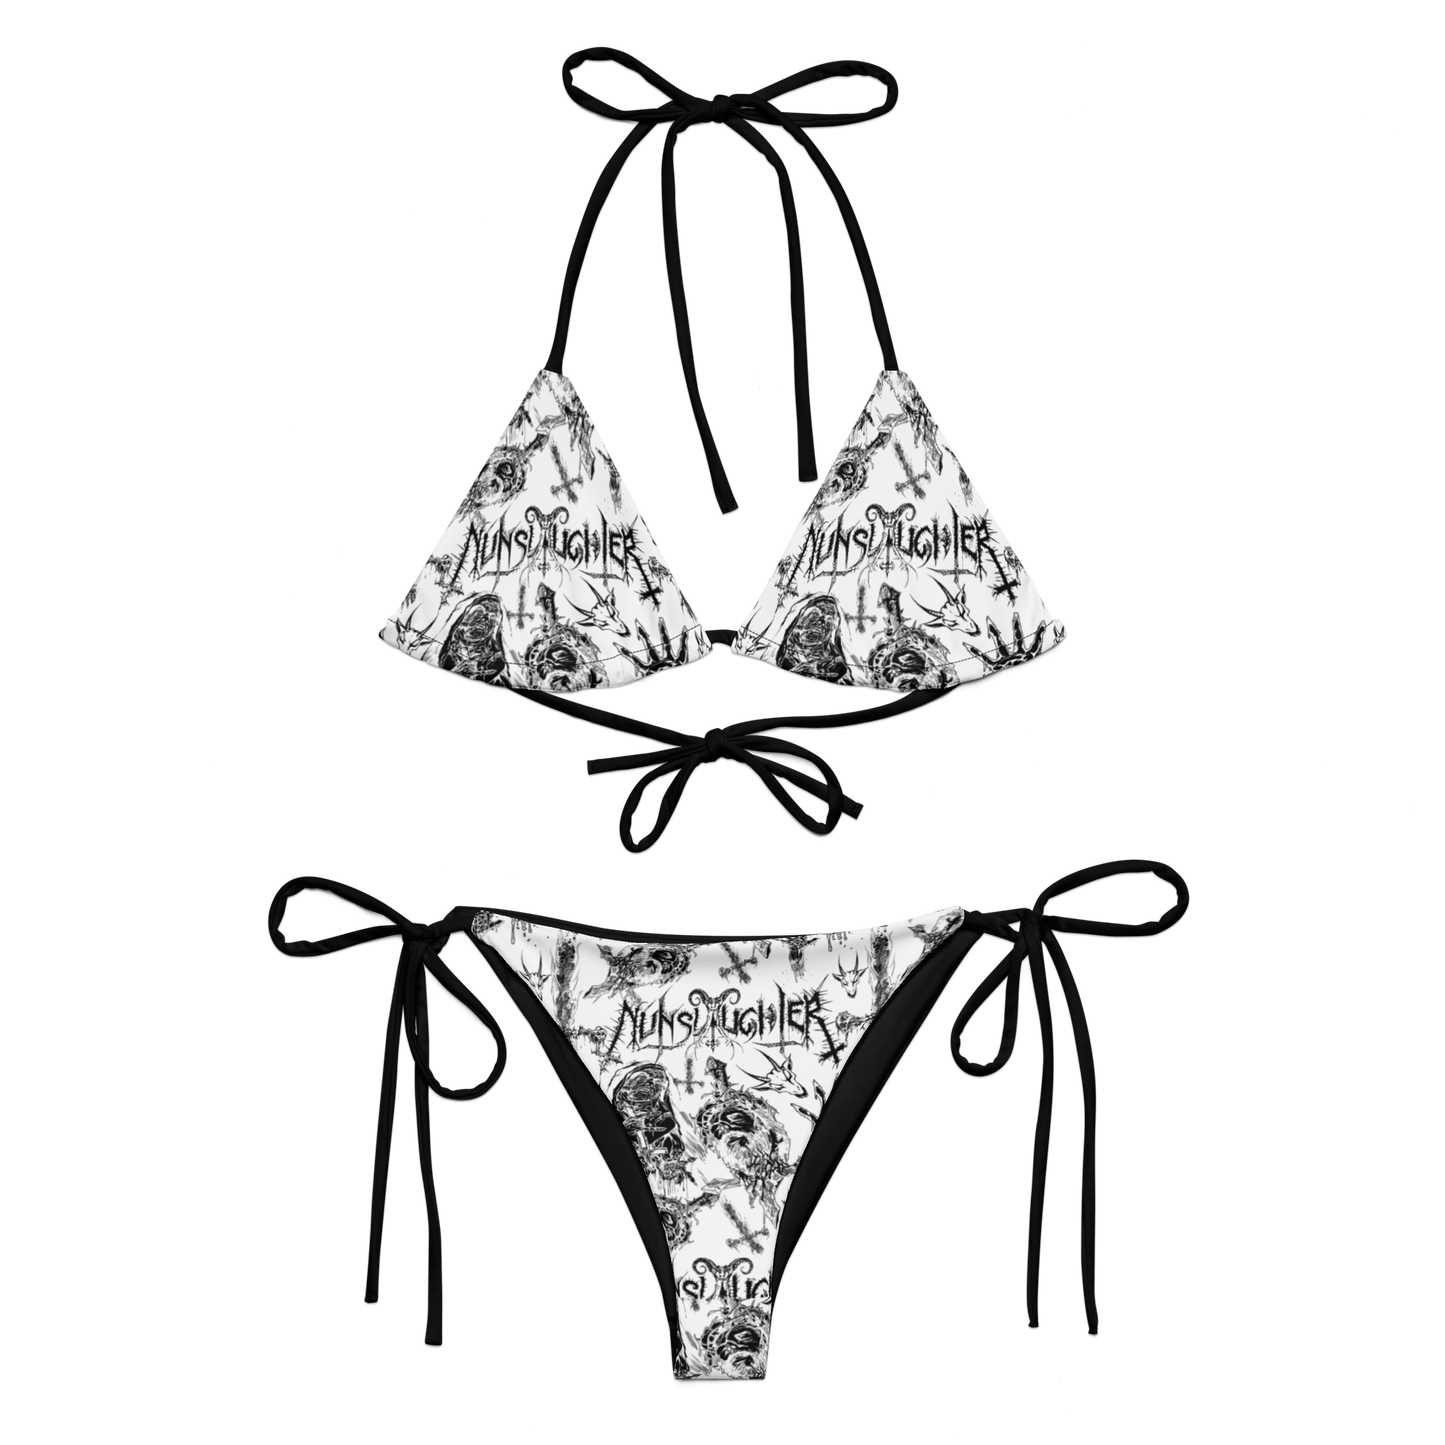 NunSlaughter Putrid pattern official licensed bikini swimsuit by Metal Mistress